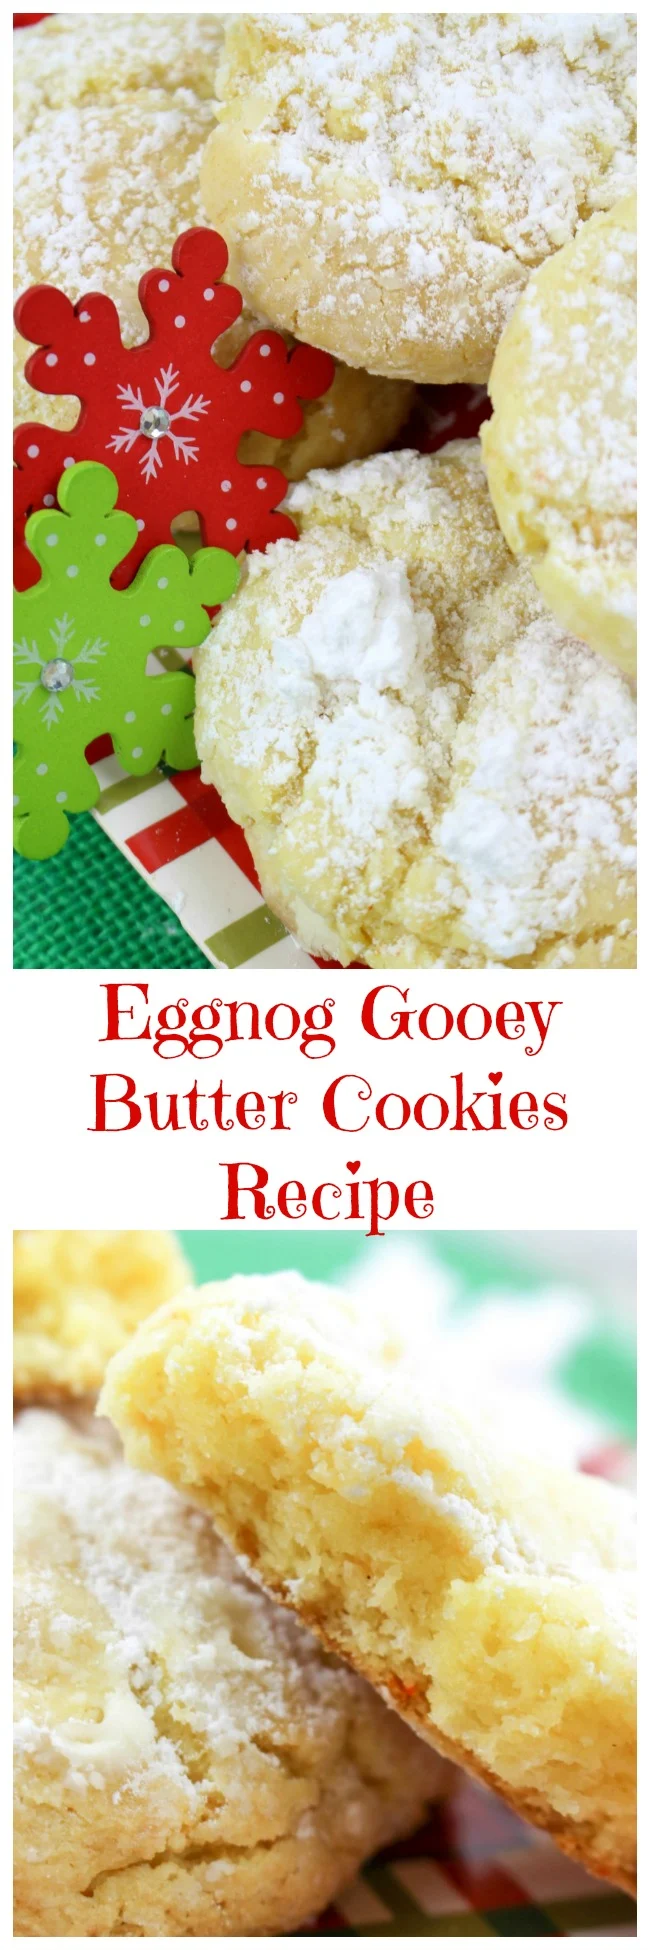 Perfect for the holiday season, these Eggnog Gooey Butter Cookies will have your kitchen smelling amazing, and your guests asking for more! Best of all, they are easy to make!